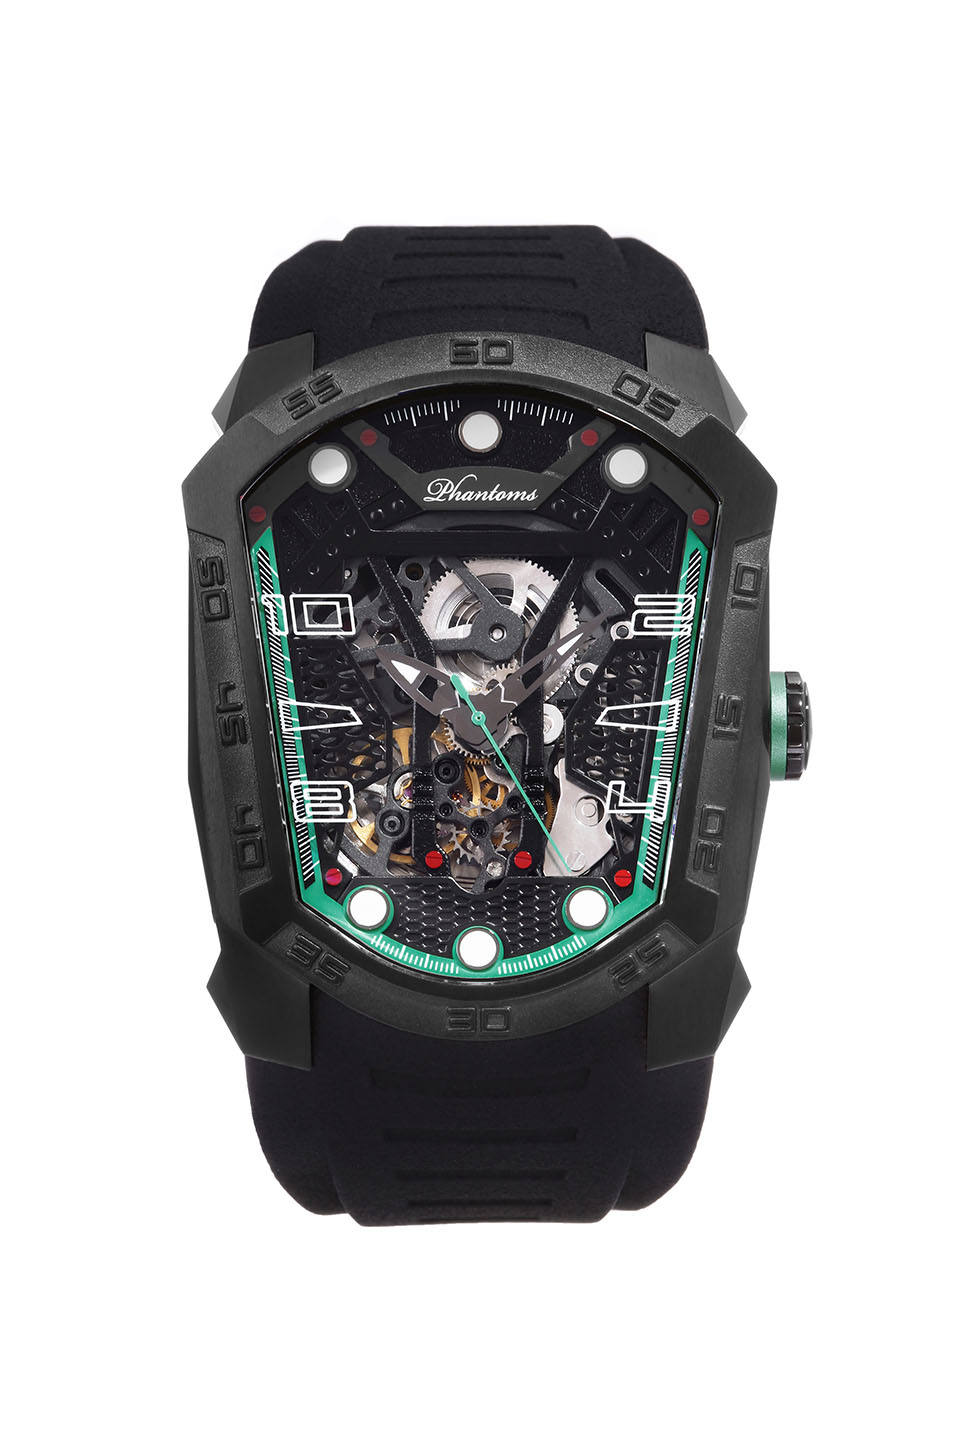 PHTW313-01 Cyber Blade Phantoms Watch Automatic Mechanical Watch Time Coffin